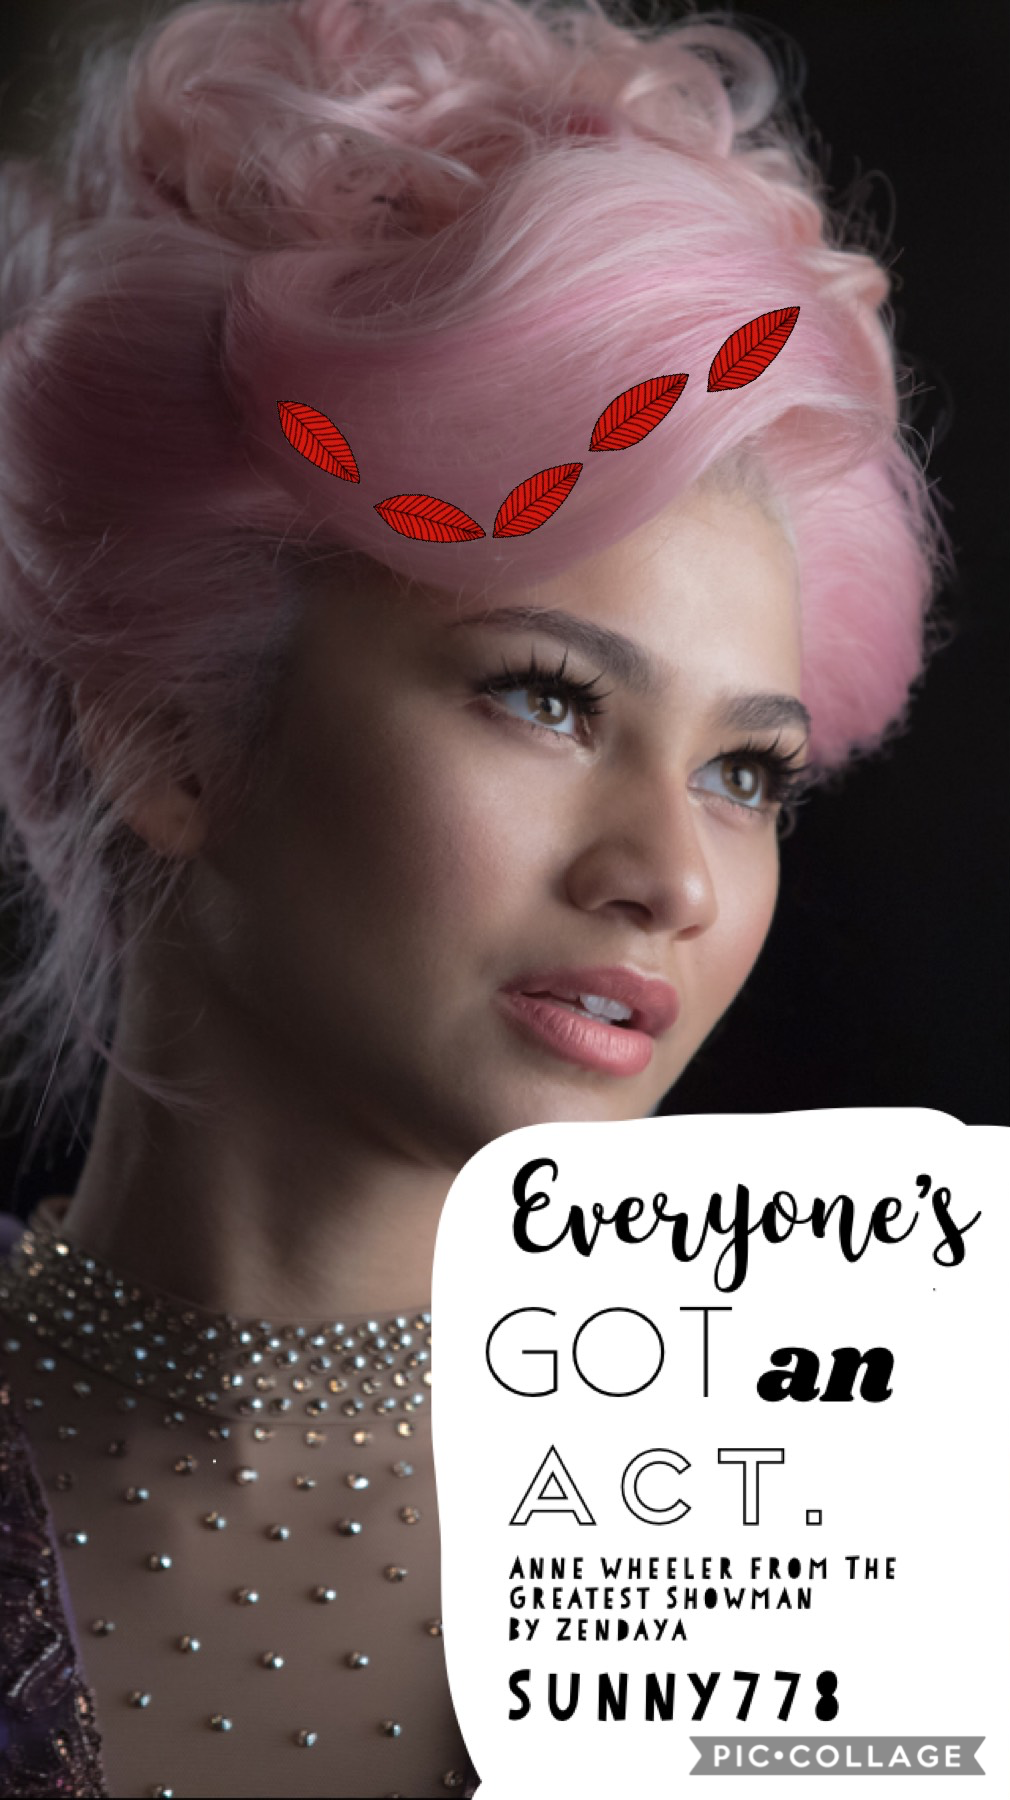 Anne Wheeler’s lines from the Greatest Showman, played by Zendaya.